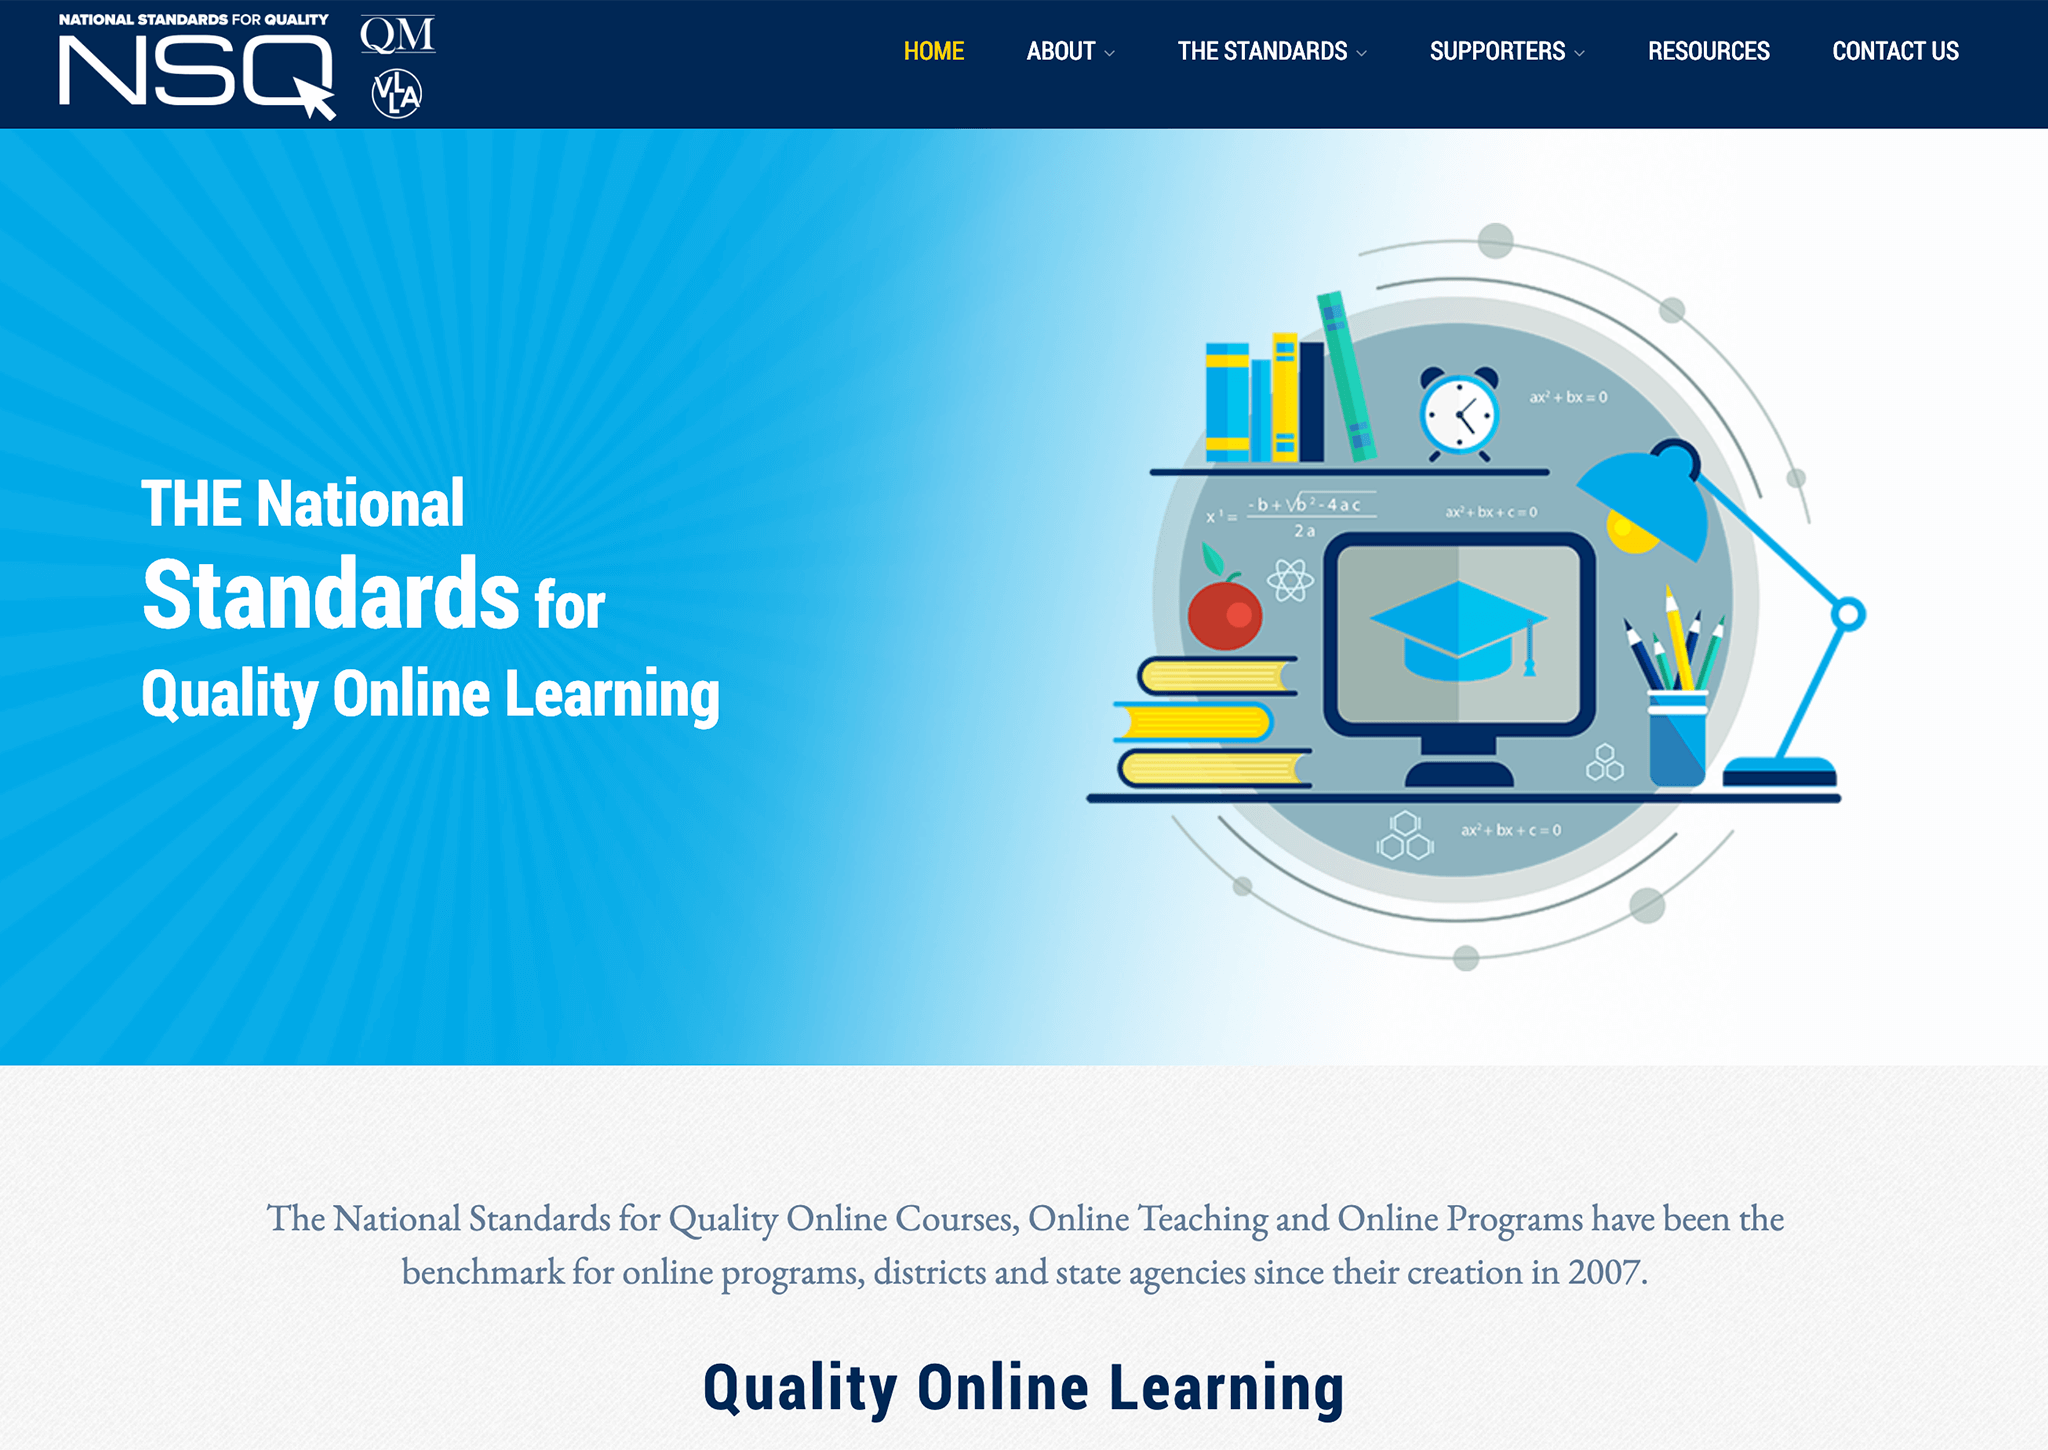 National Standards for Quality Online Learning